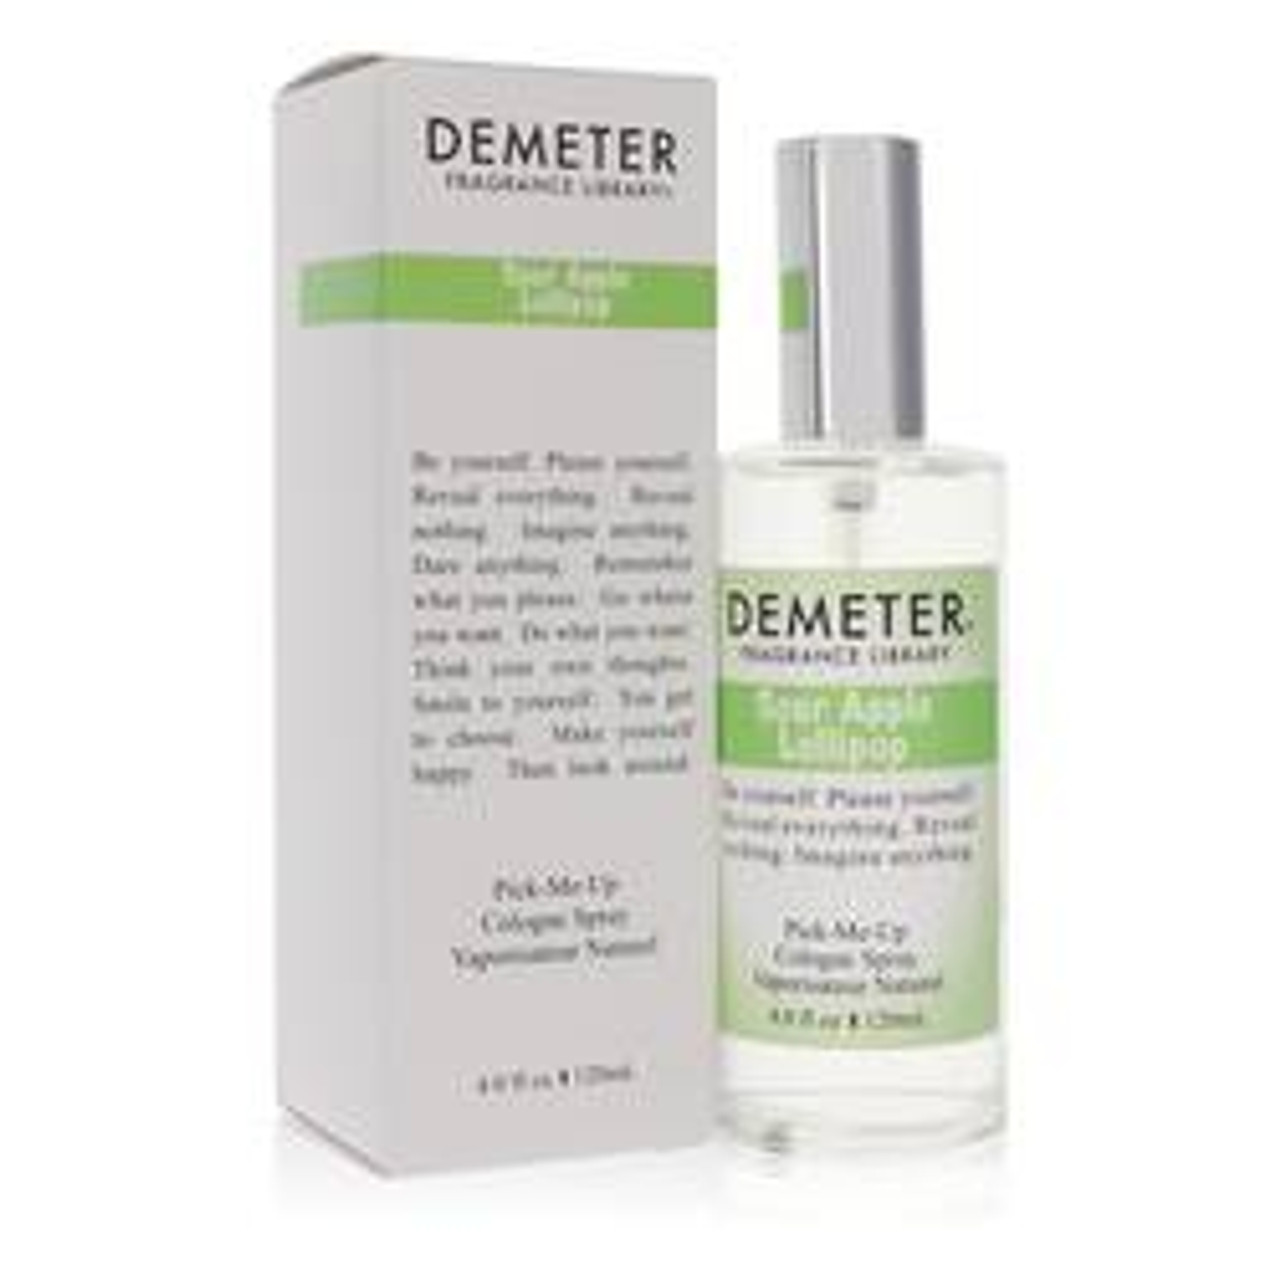 Demeter Sour Apple Lollipop Perfume By Demeter Cologne Spray (formerly Jolly Rancher Green Apple) 4 oz for Women - [From 79.50 - Choose pk Qty ] - *Ships from Miami